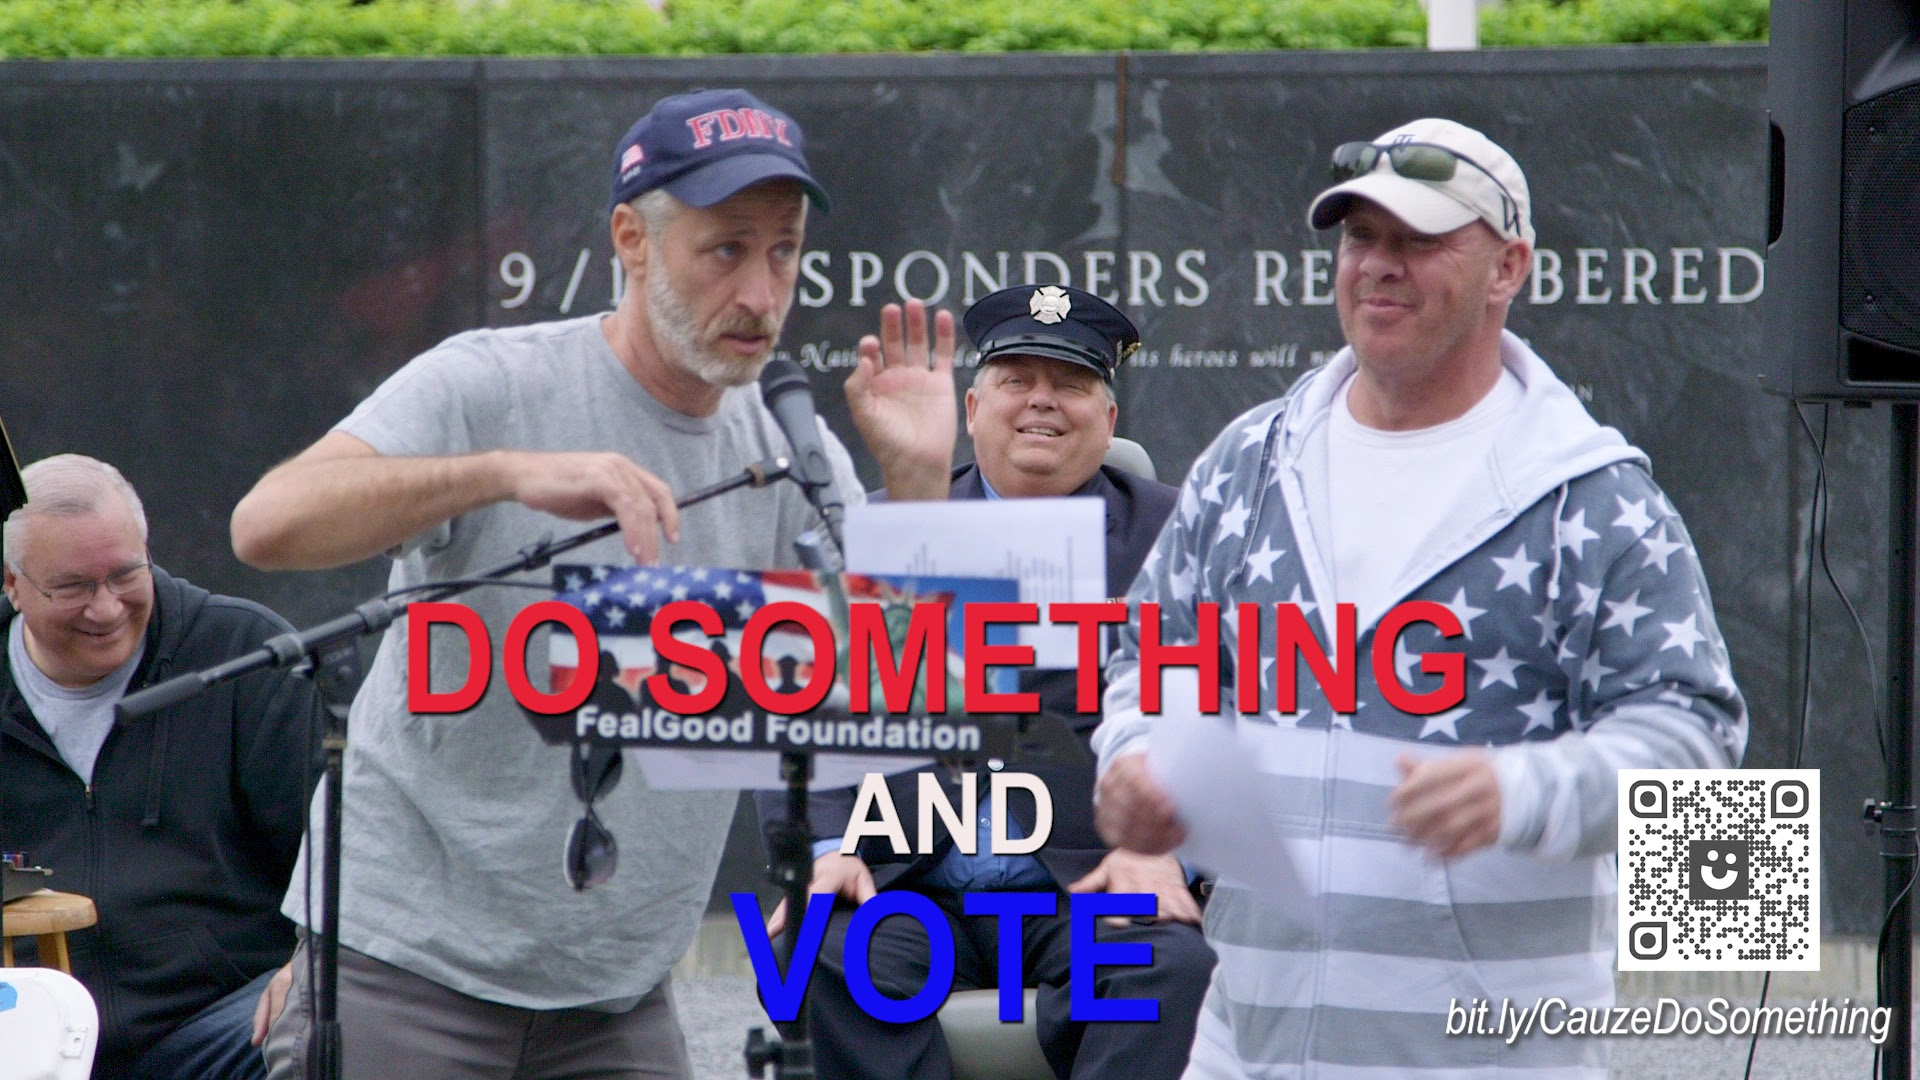 Alabama Shakes, Keb’ Mo’ And More Headline ‘Do Something And Vote’ Benefit Concert Documentary